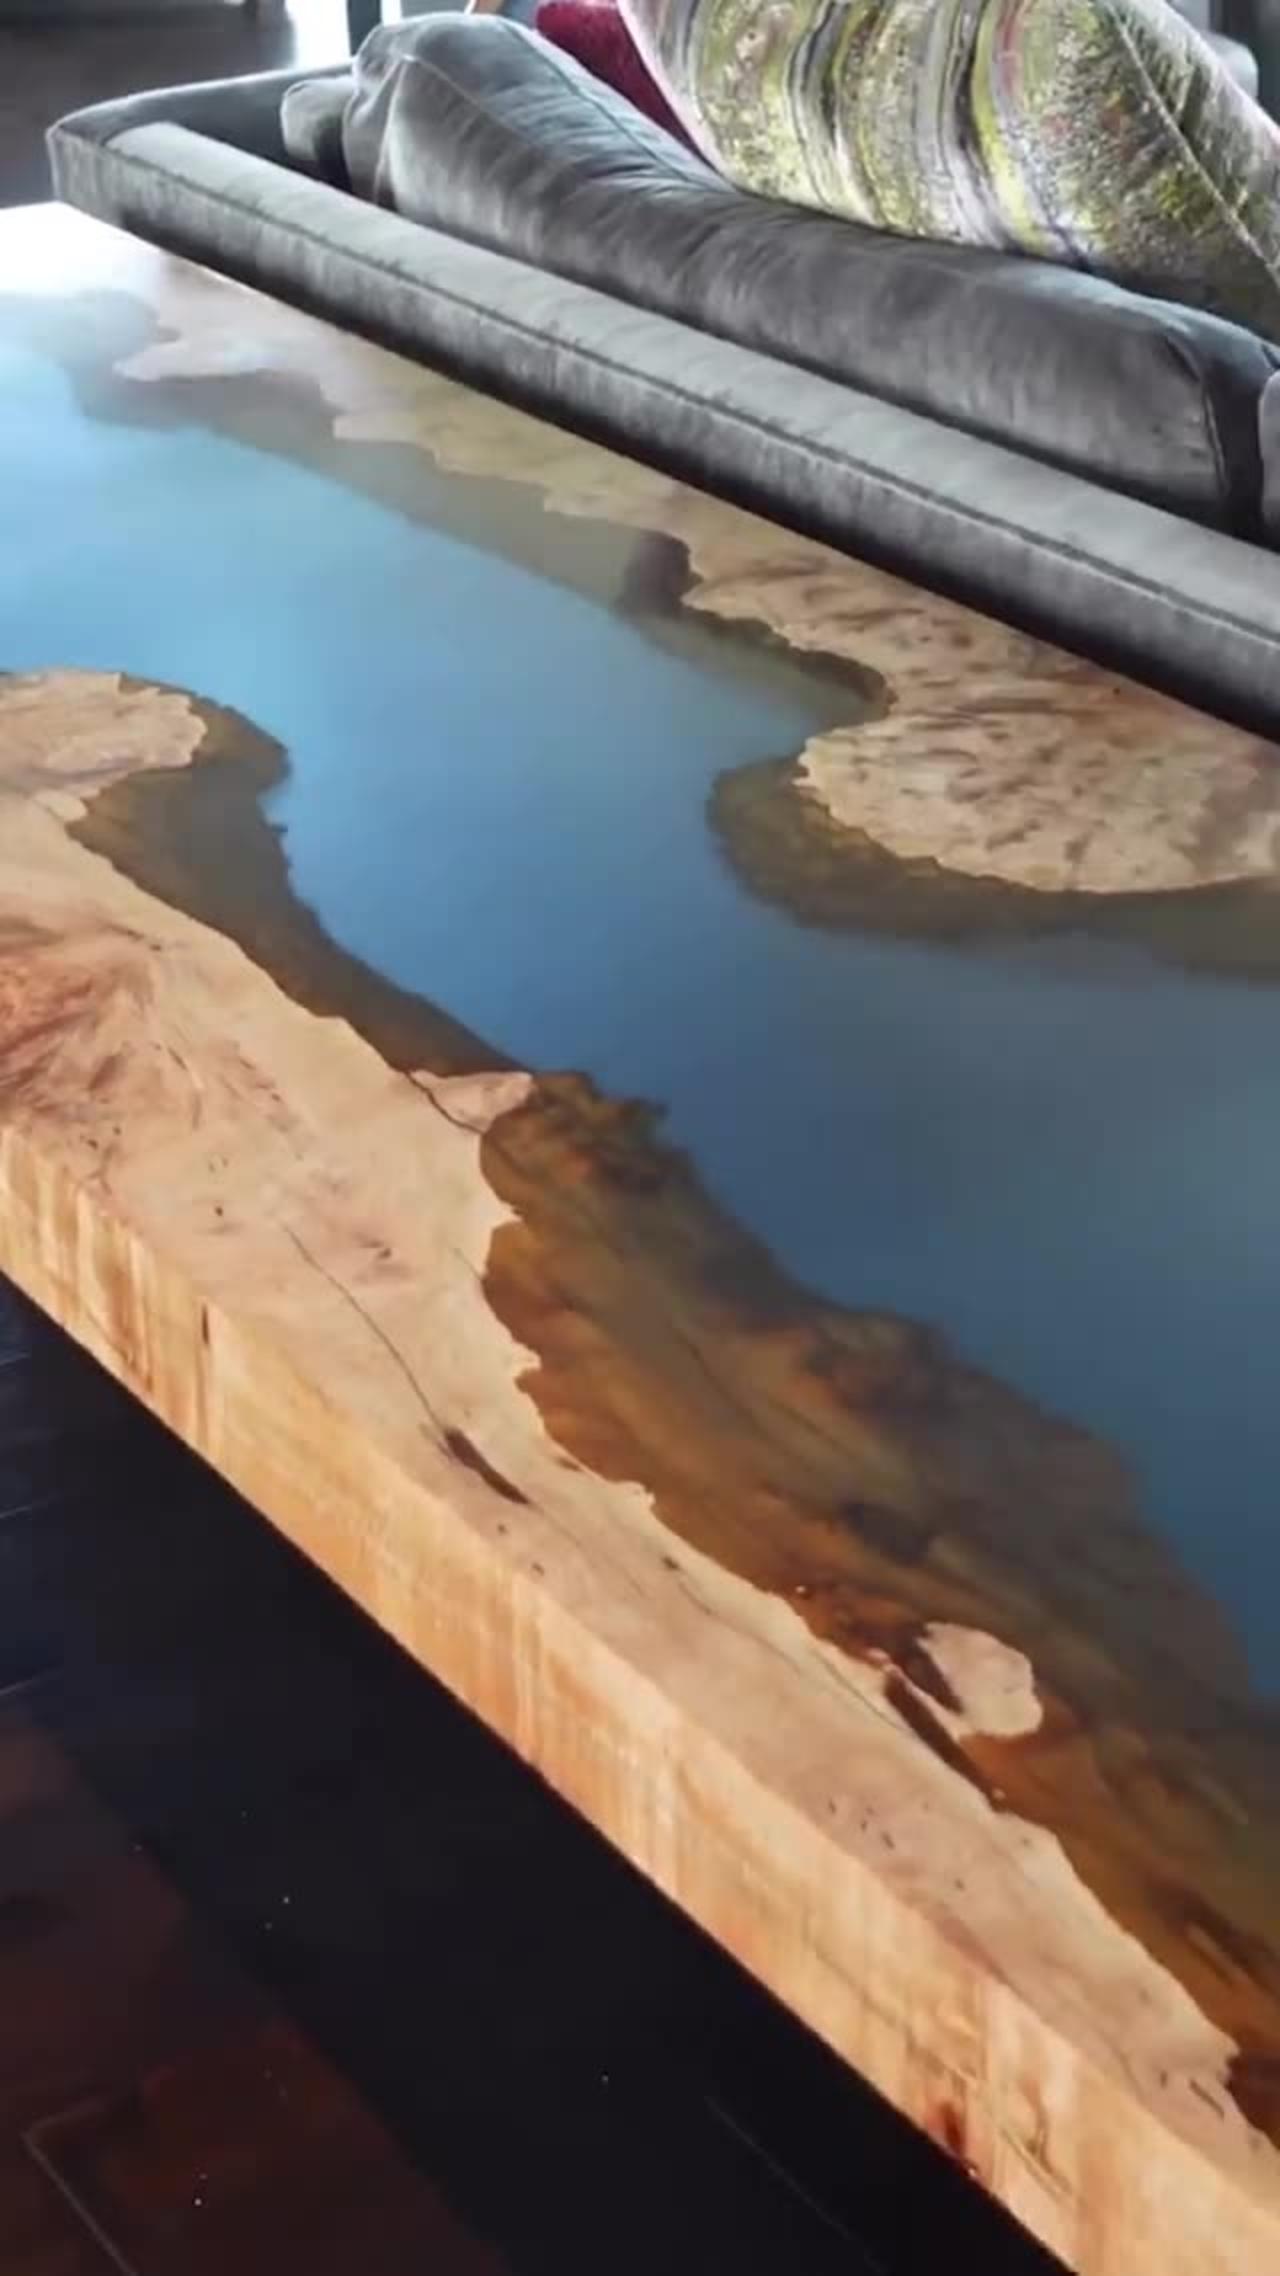 How to turn wood into art